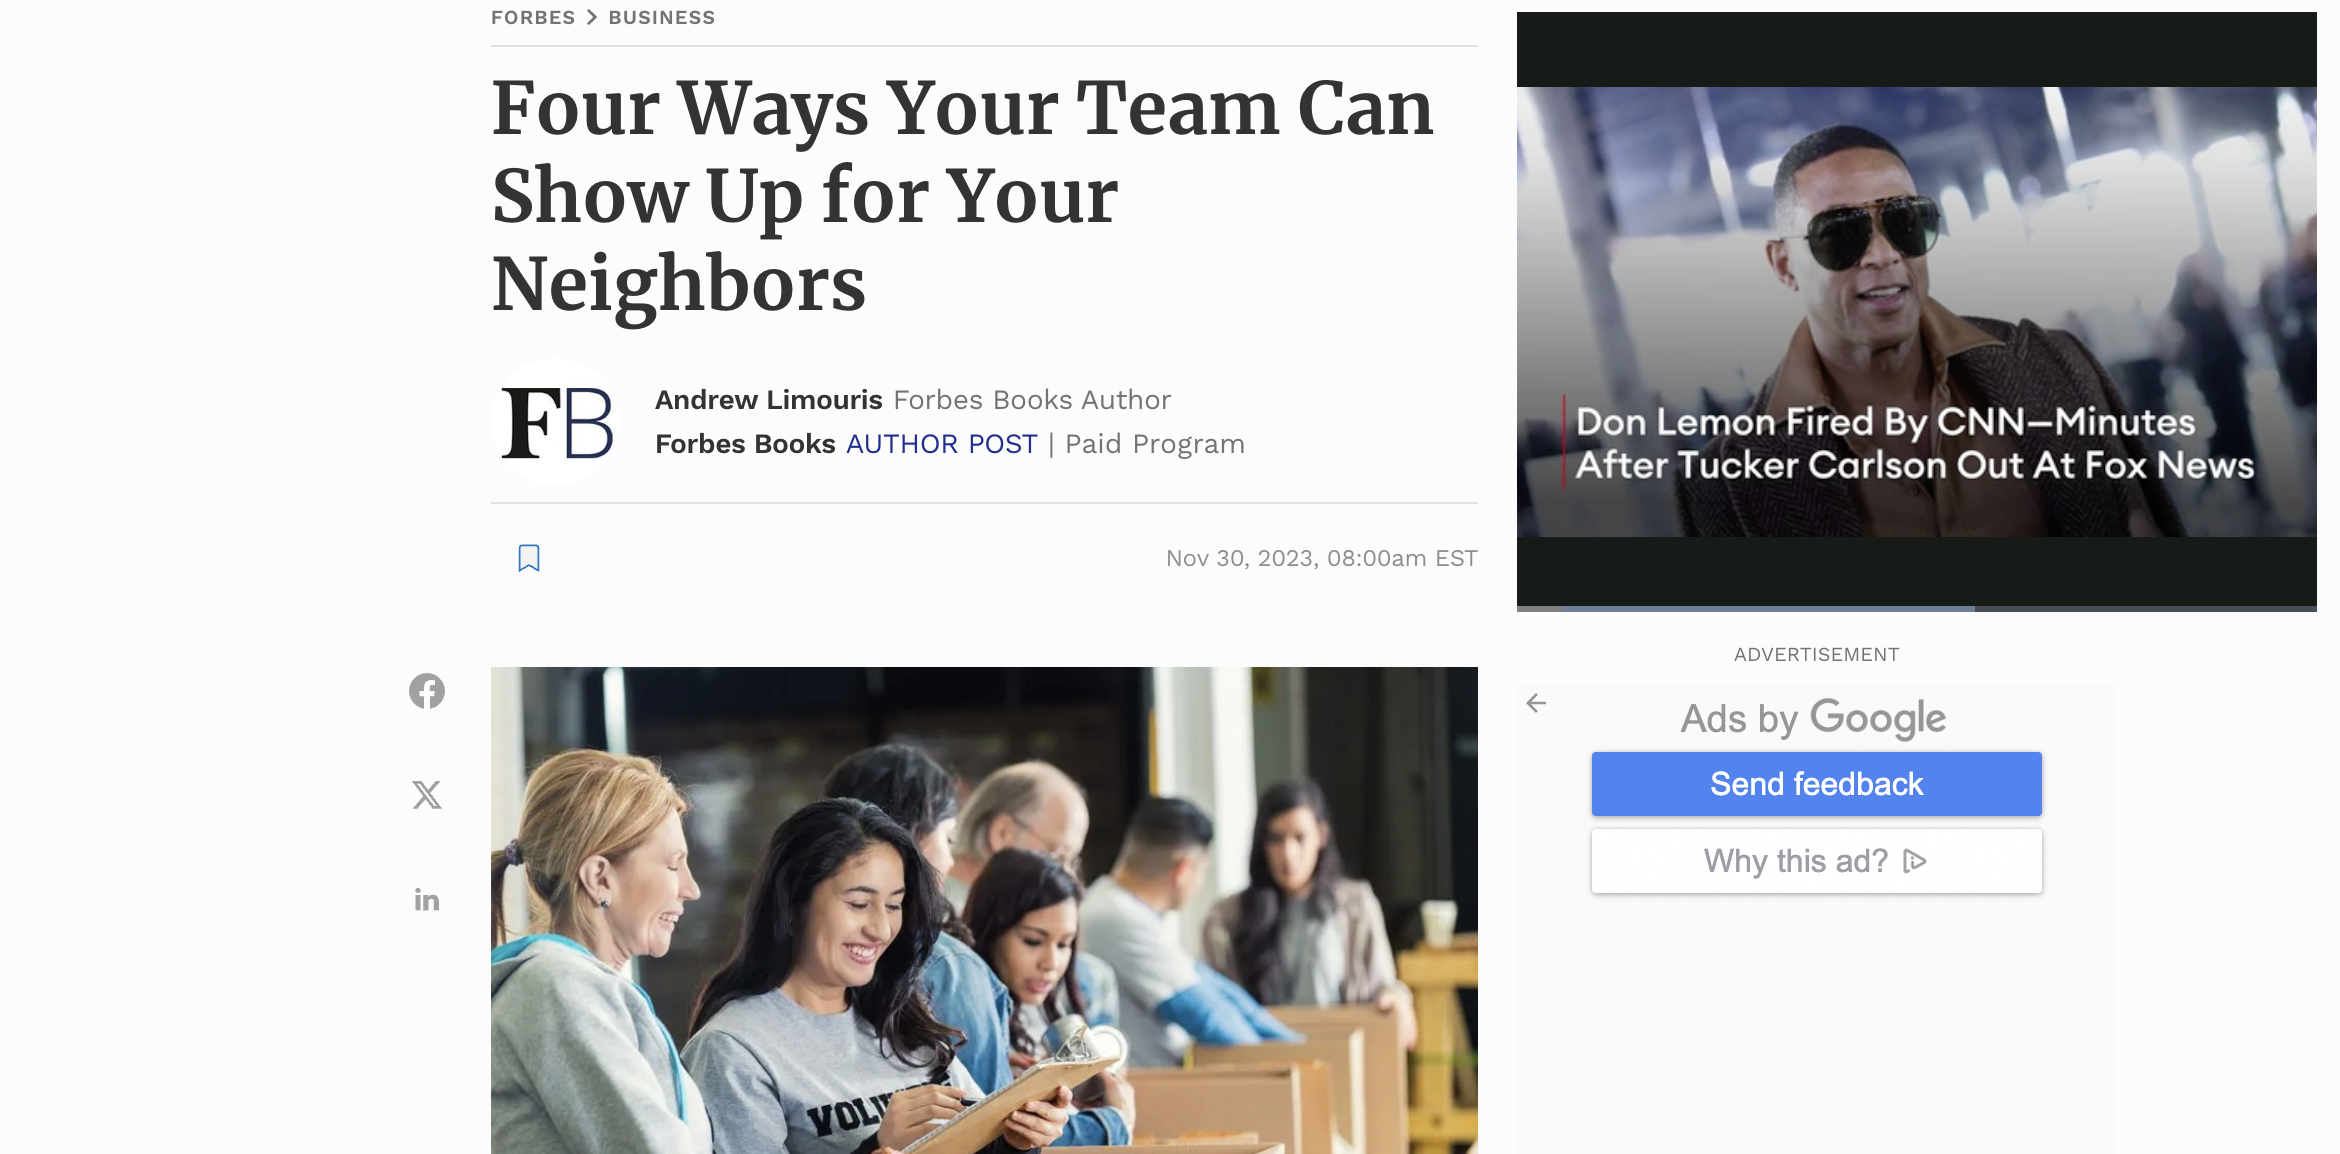 Four Ways Your Team Can Show Up for Your Neighbors (Copy)